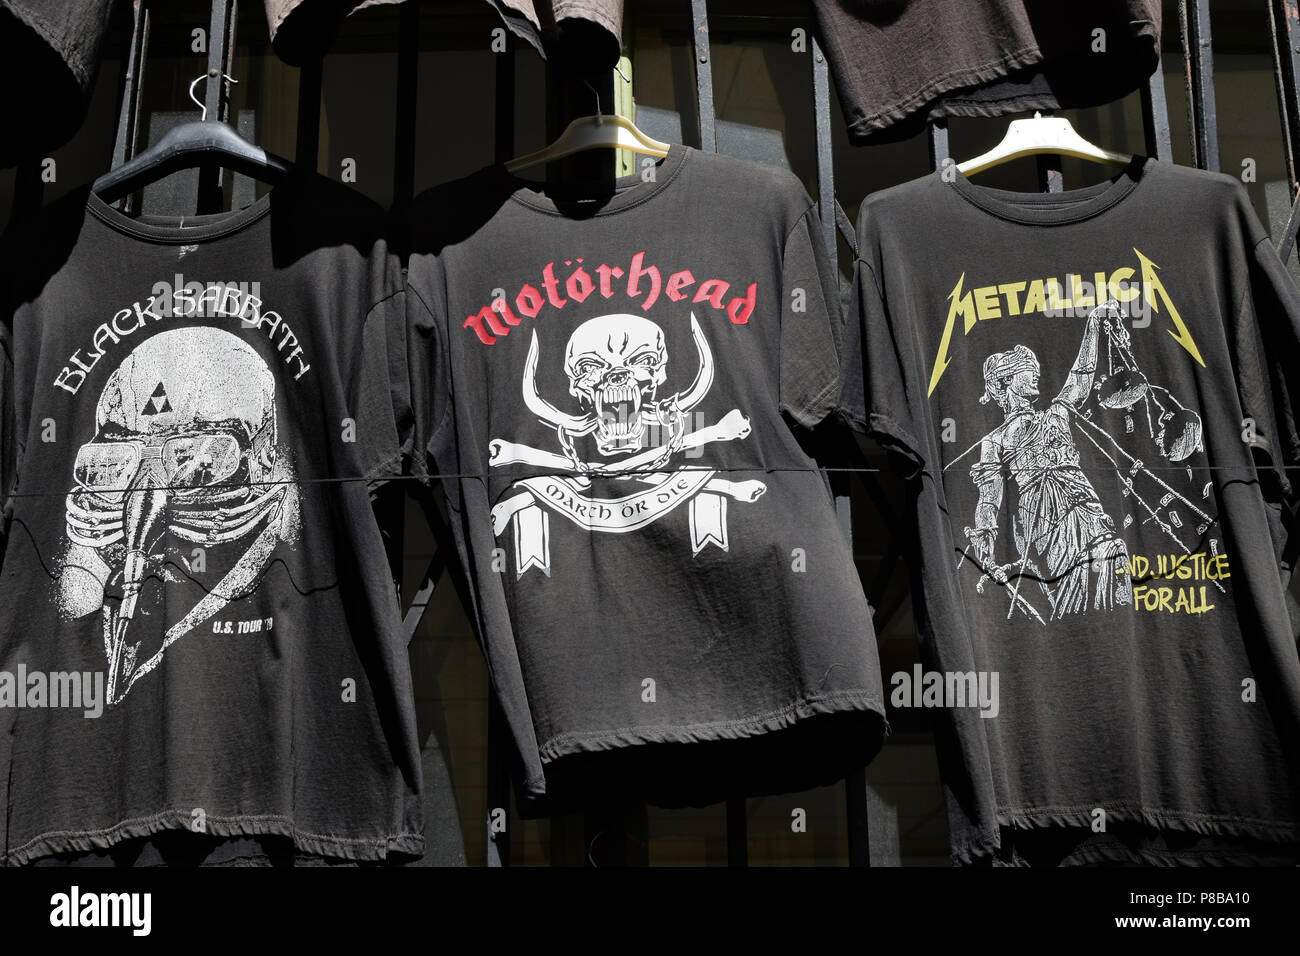 ATHENS, GREECE - APRIL 1, 2018: T-shirts for sale printed with heavy metal and hard rock music band logos. Stock Photo